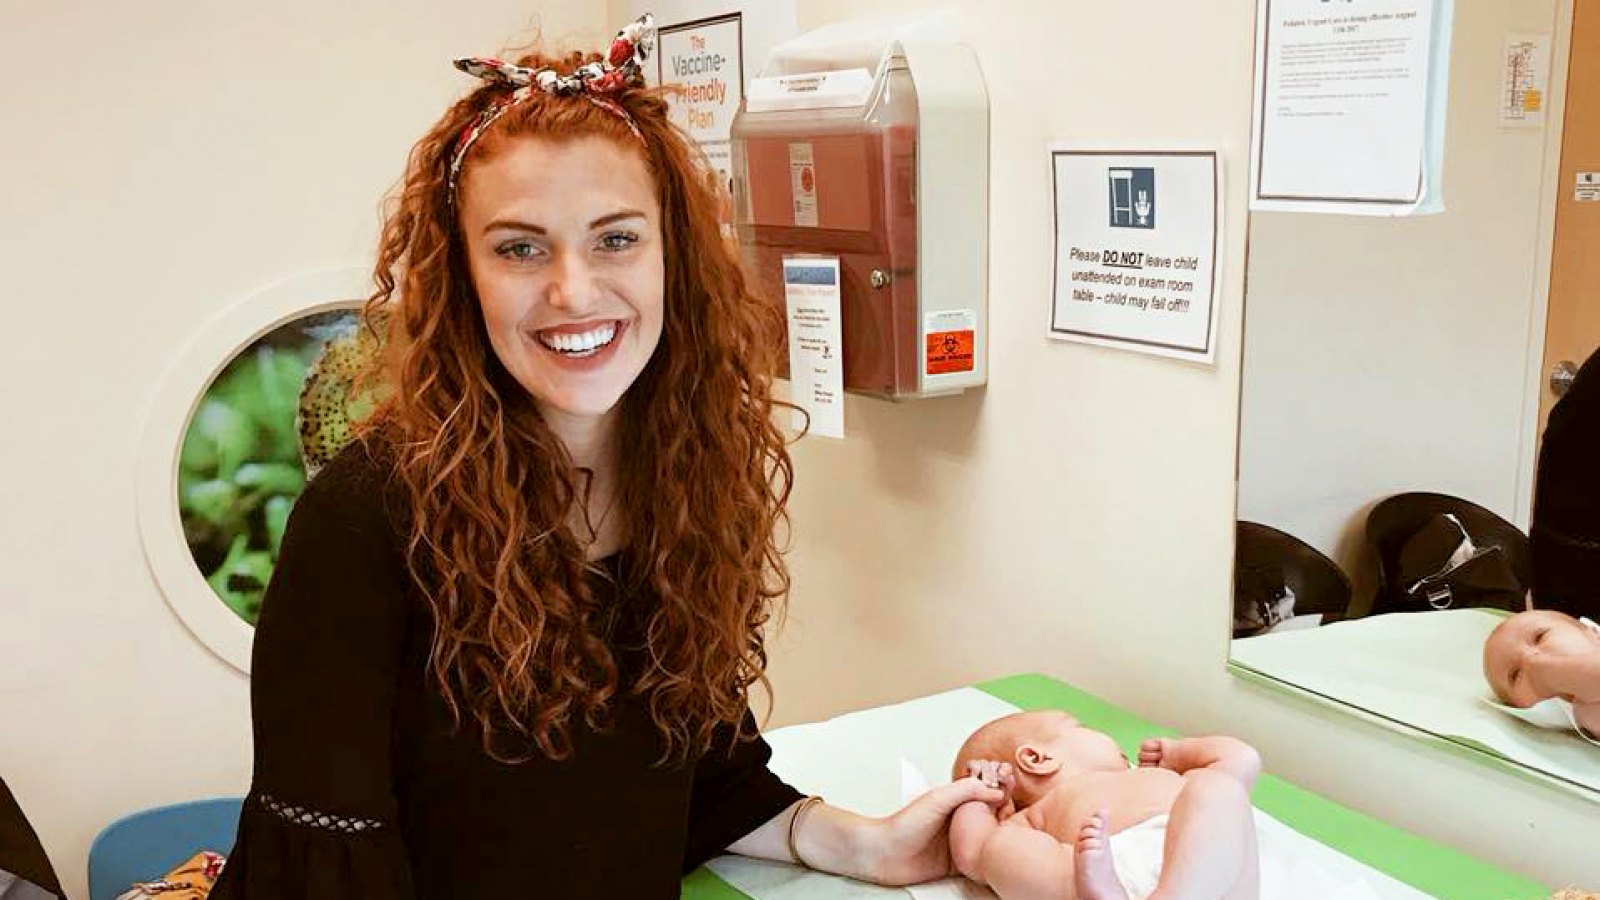 ‘Little People, Big World’ Star Audrey Roloff with her daughter Ember